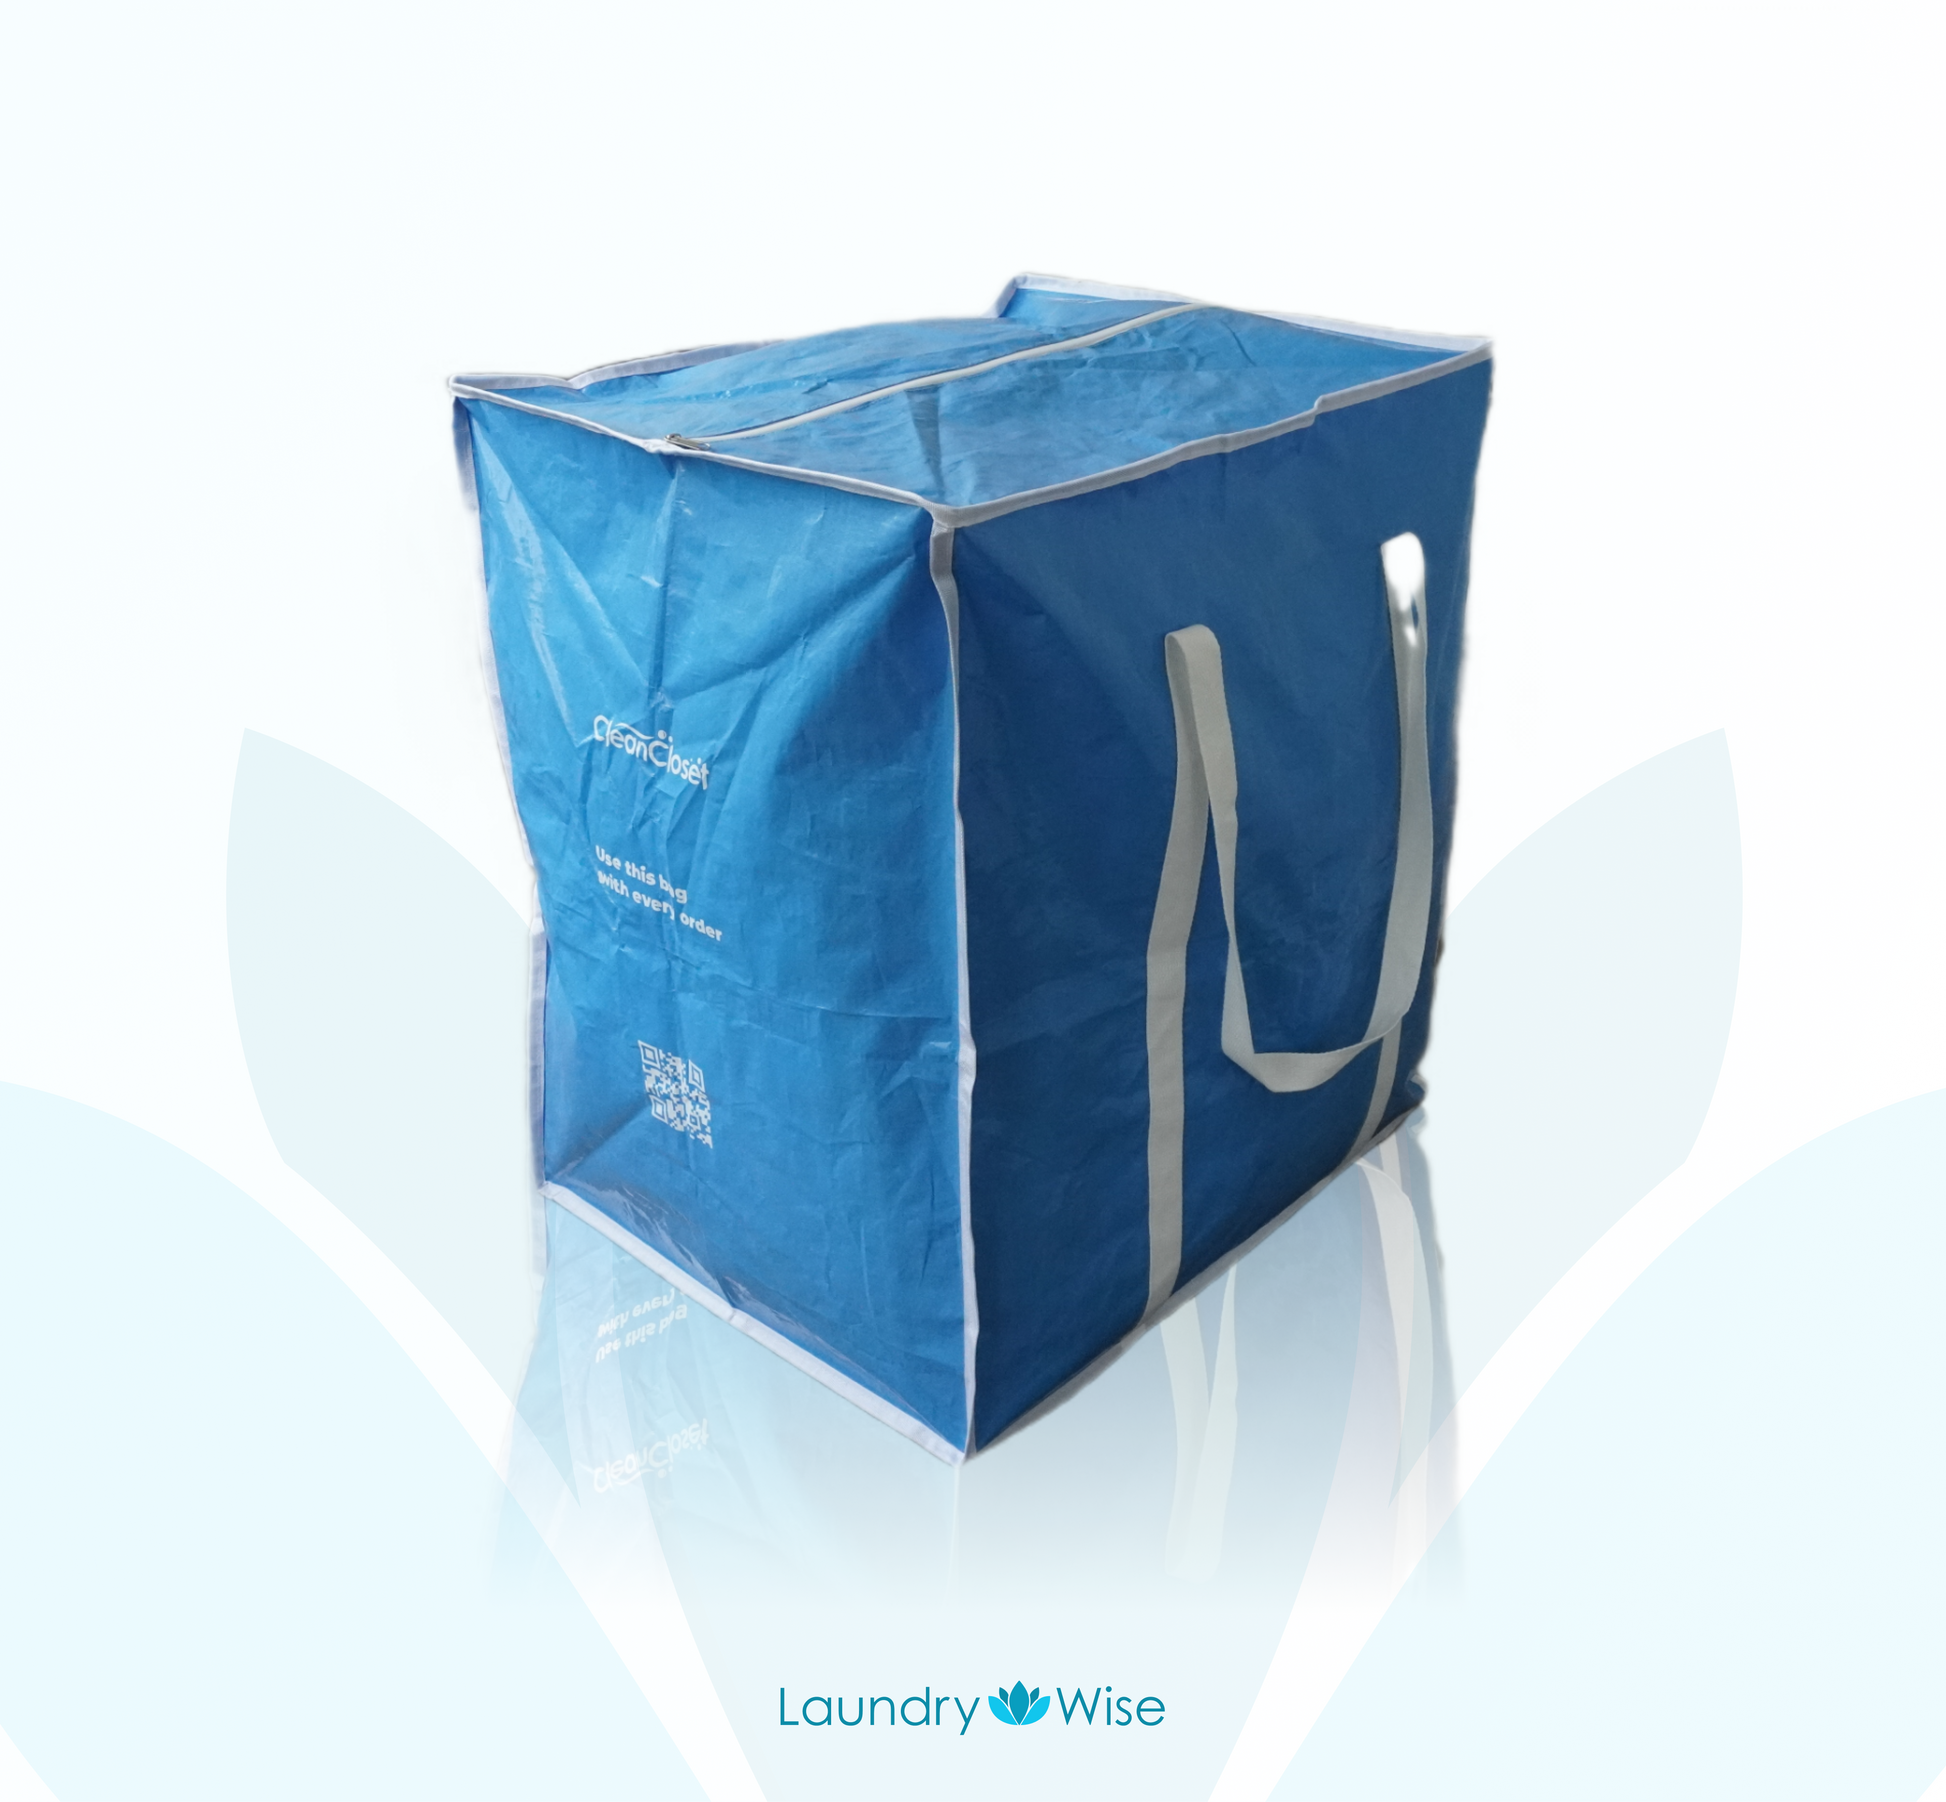 Wash and Fold Family Laundry Bag Bags Laundry Wise   